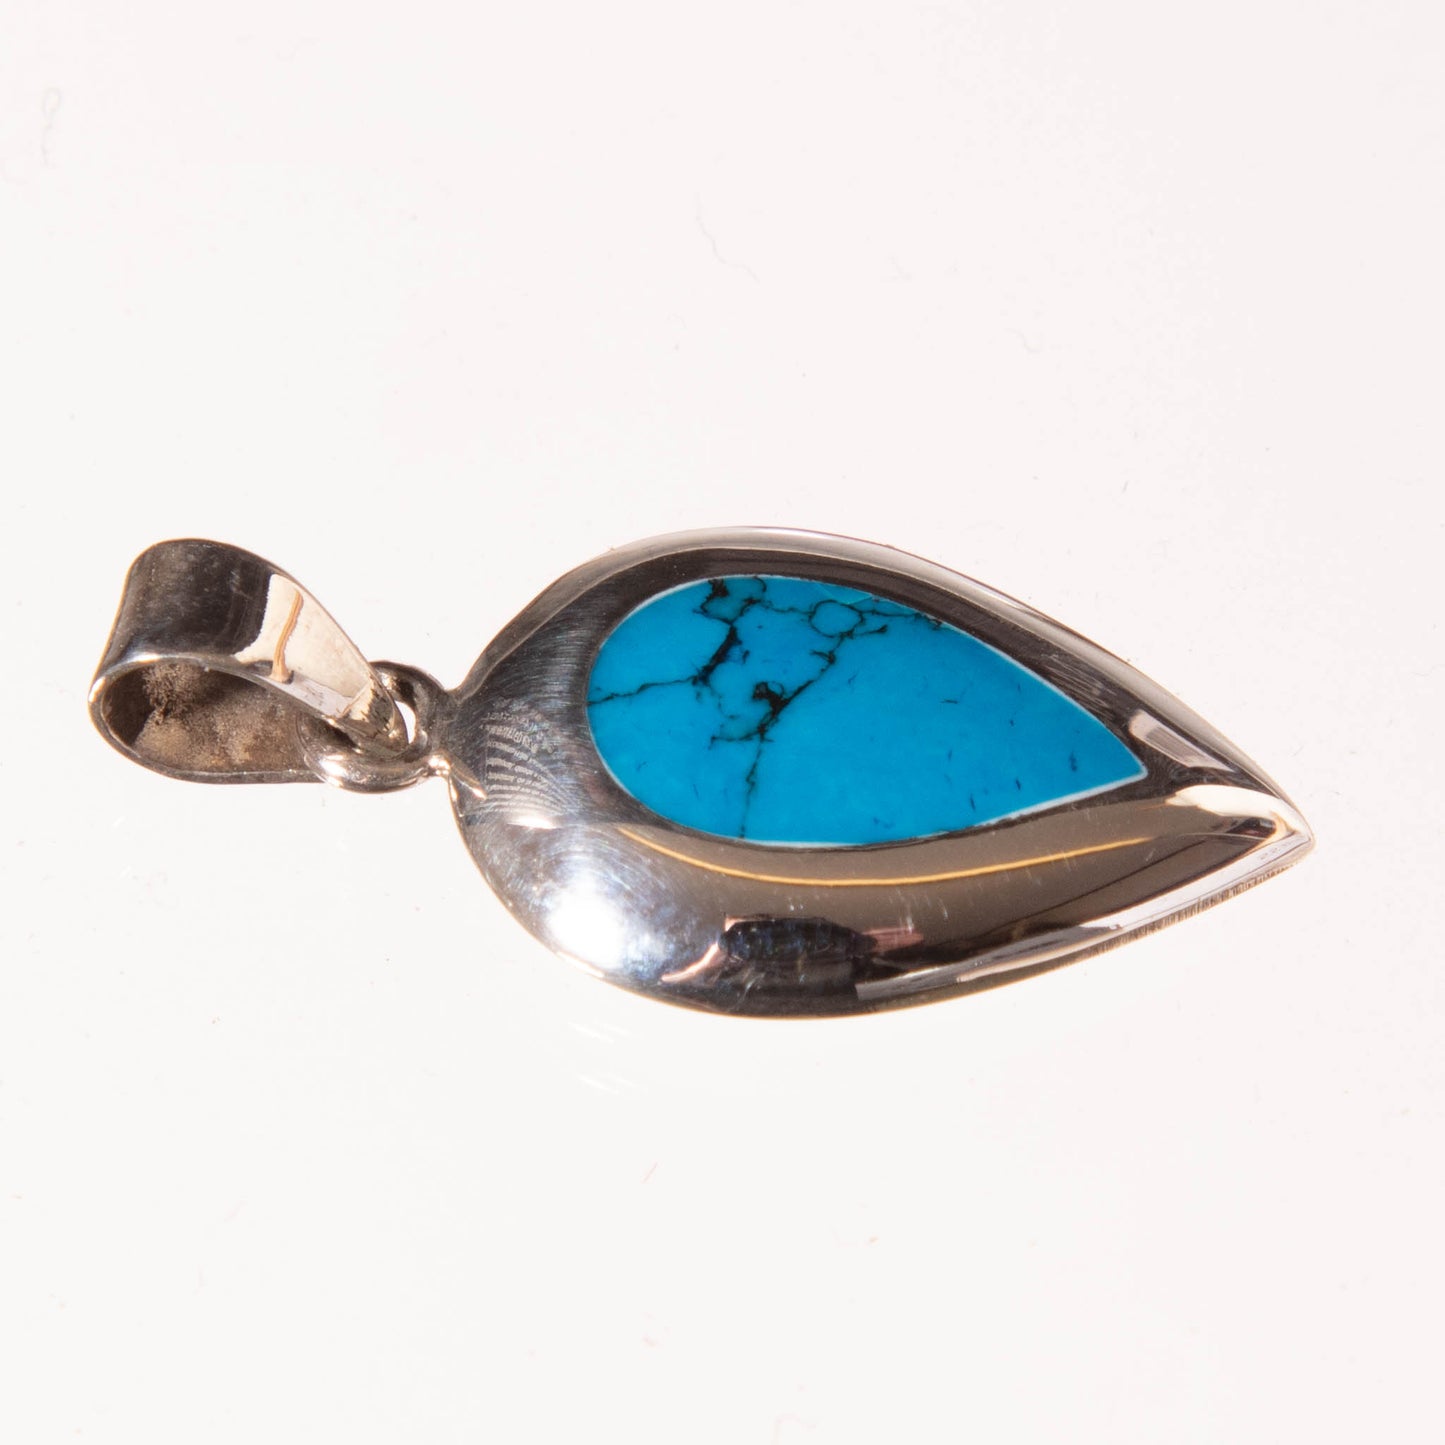 Pendant, Featured Turquoise set in Sterling Silver